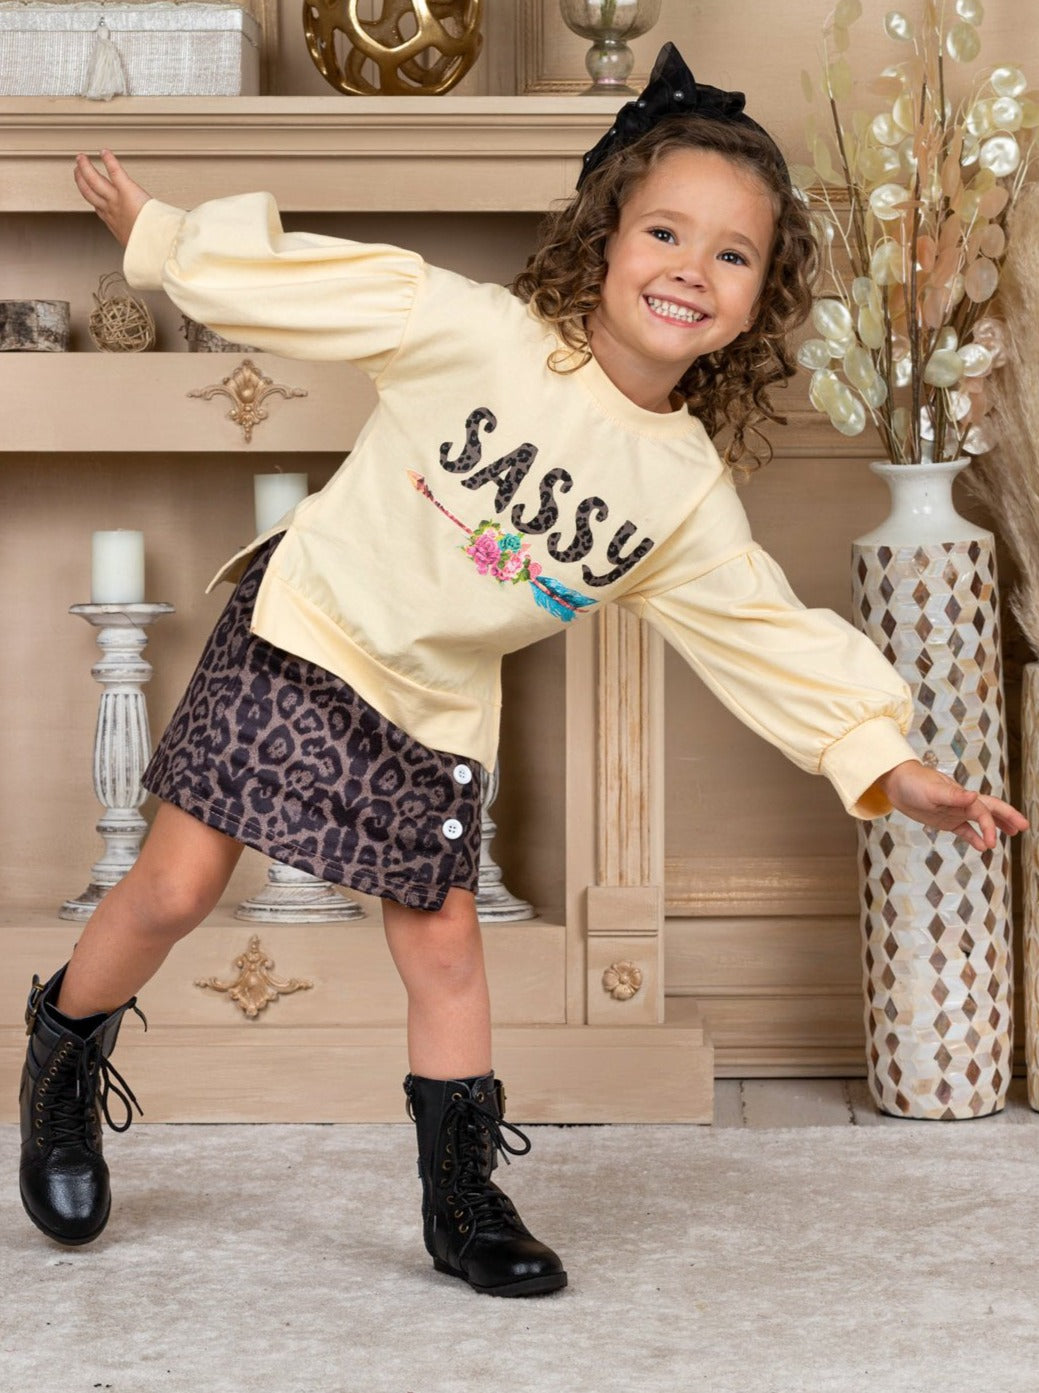 Little girls Fall long-sleeve "Sassy" graphic sweatshirt with side slits and a button-down leopard print skirt - Mia Belle Girls